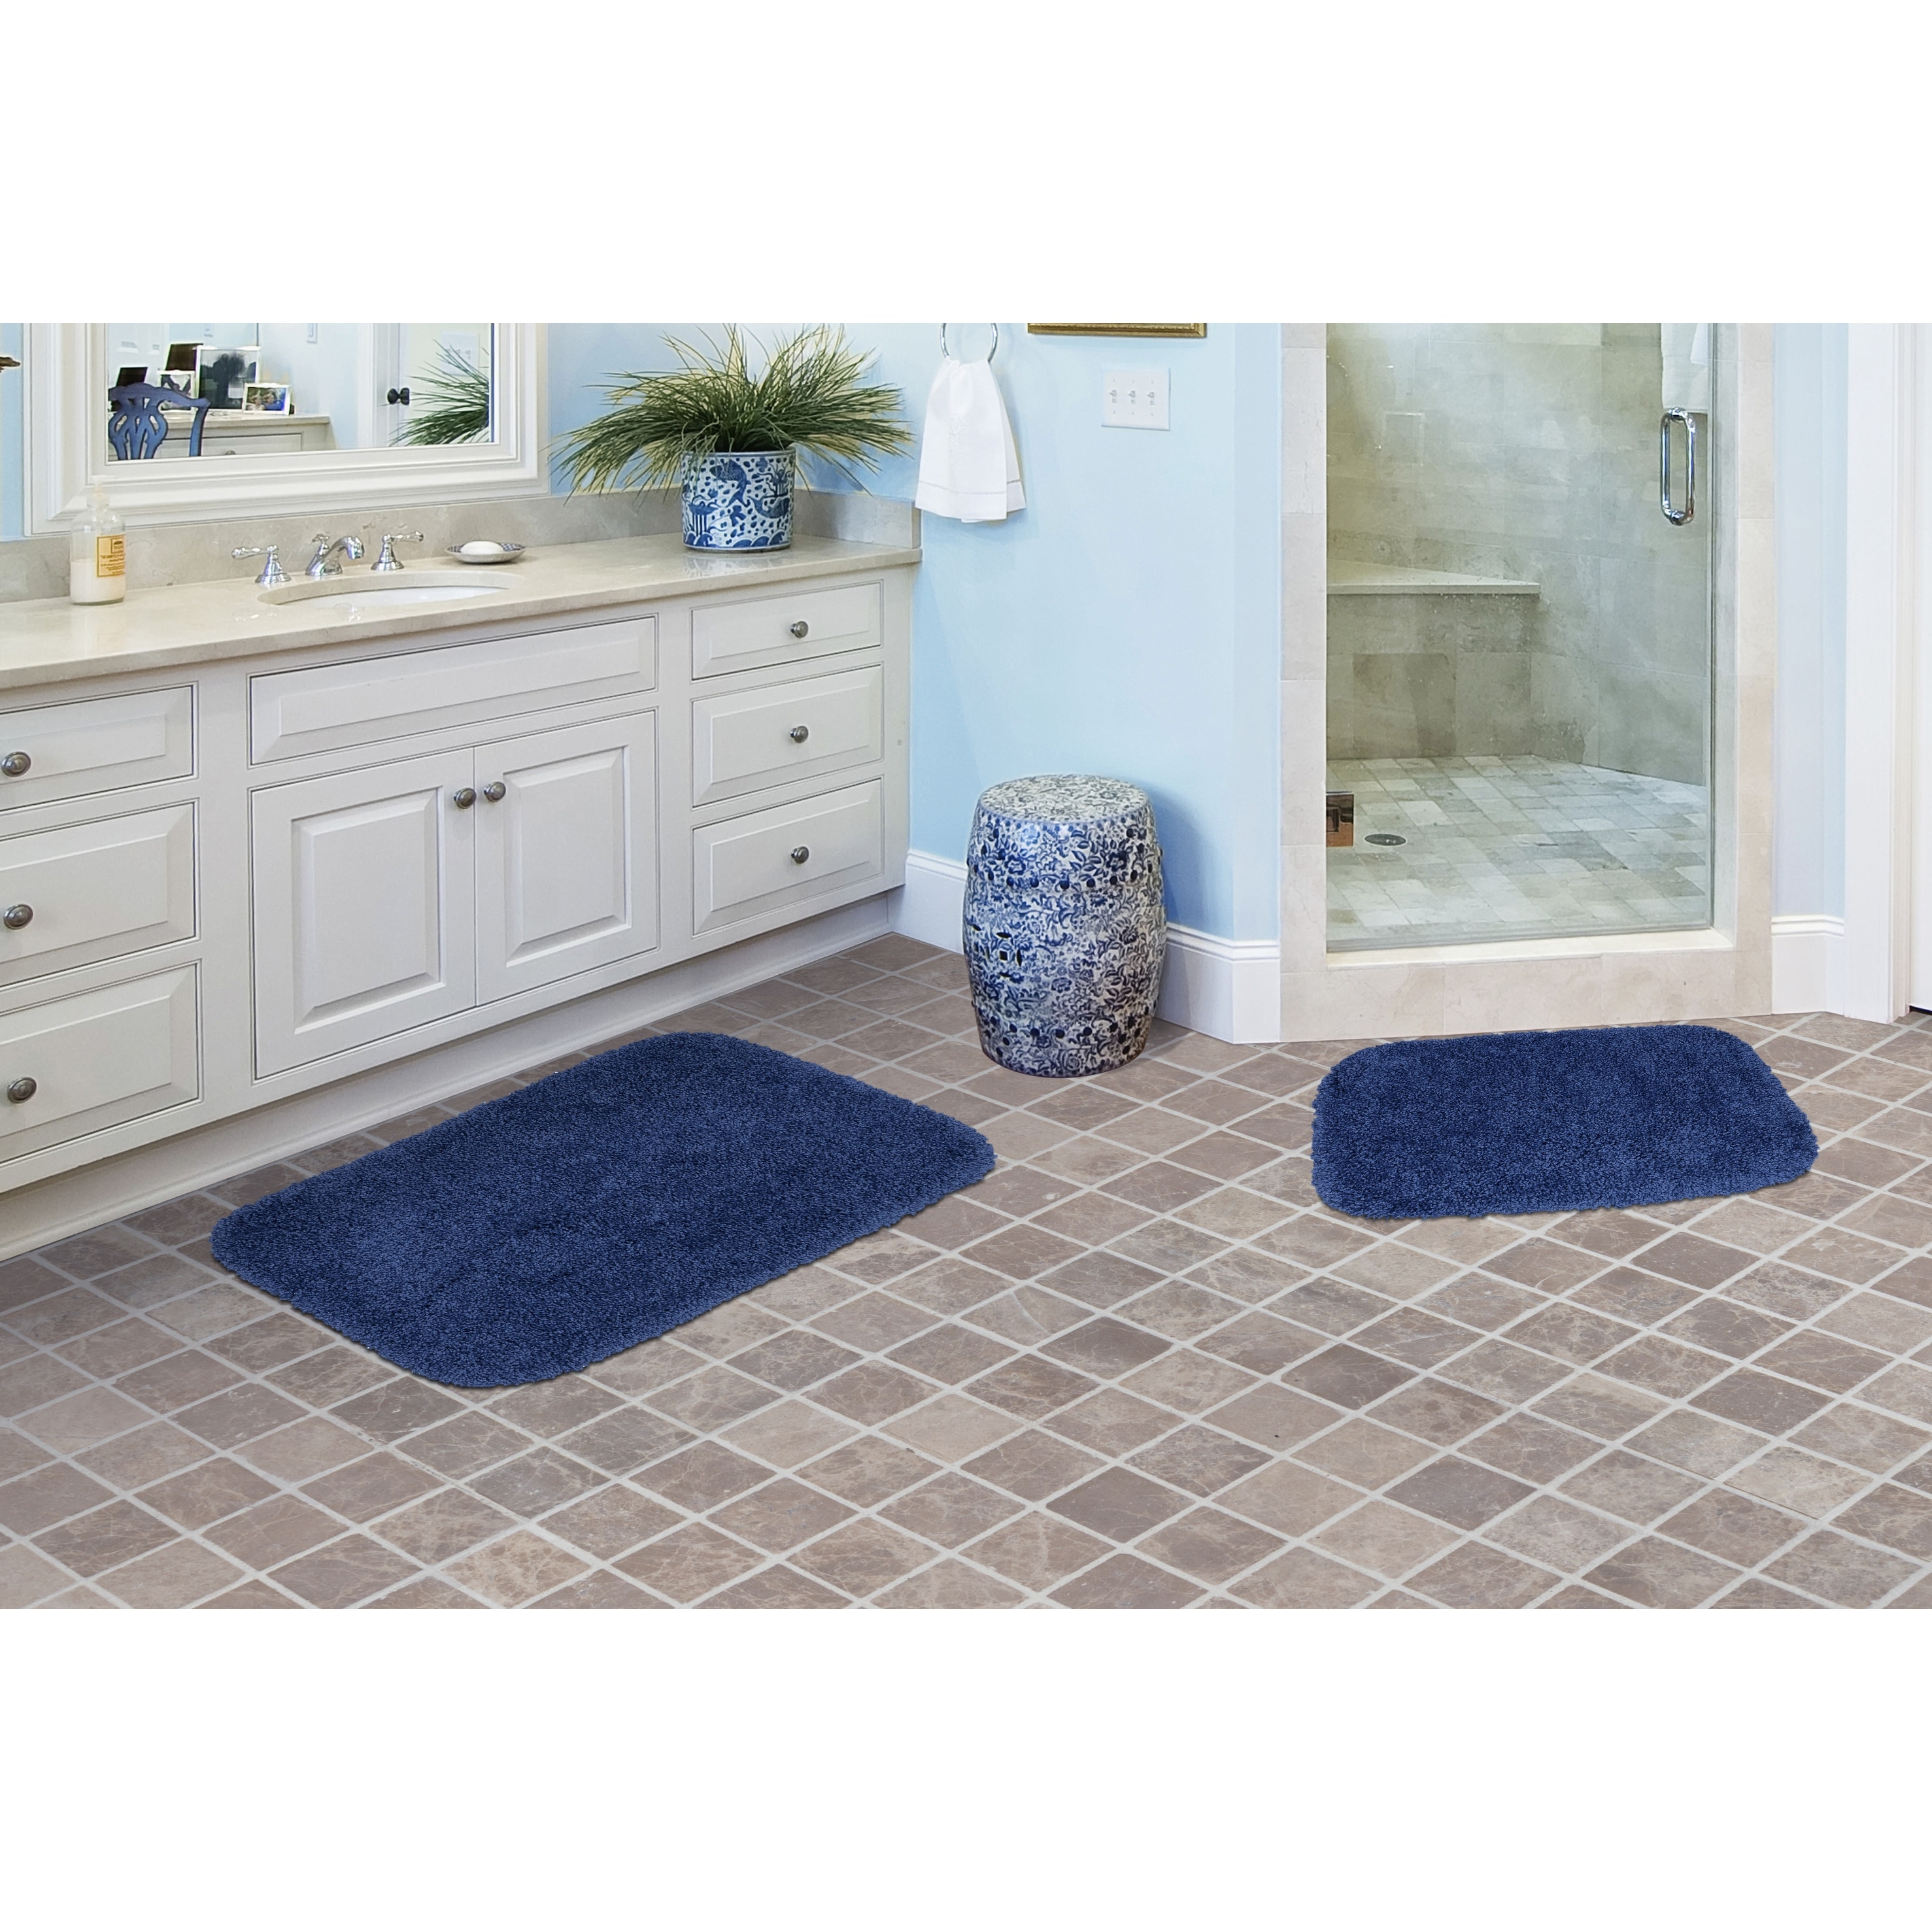 https://ak1.ostkcdn.com/images/products/is/images/direct/554e997381a703b7e01612d5b37e58d162e21179/Serendipity-Shag-Washable-Nylon-Bathroom-Rug%2C-or-Set-in-Navy.jpg